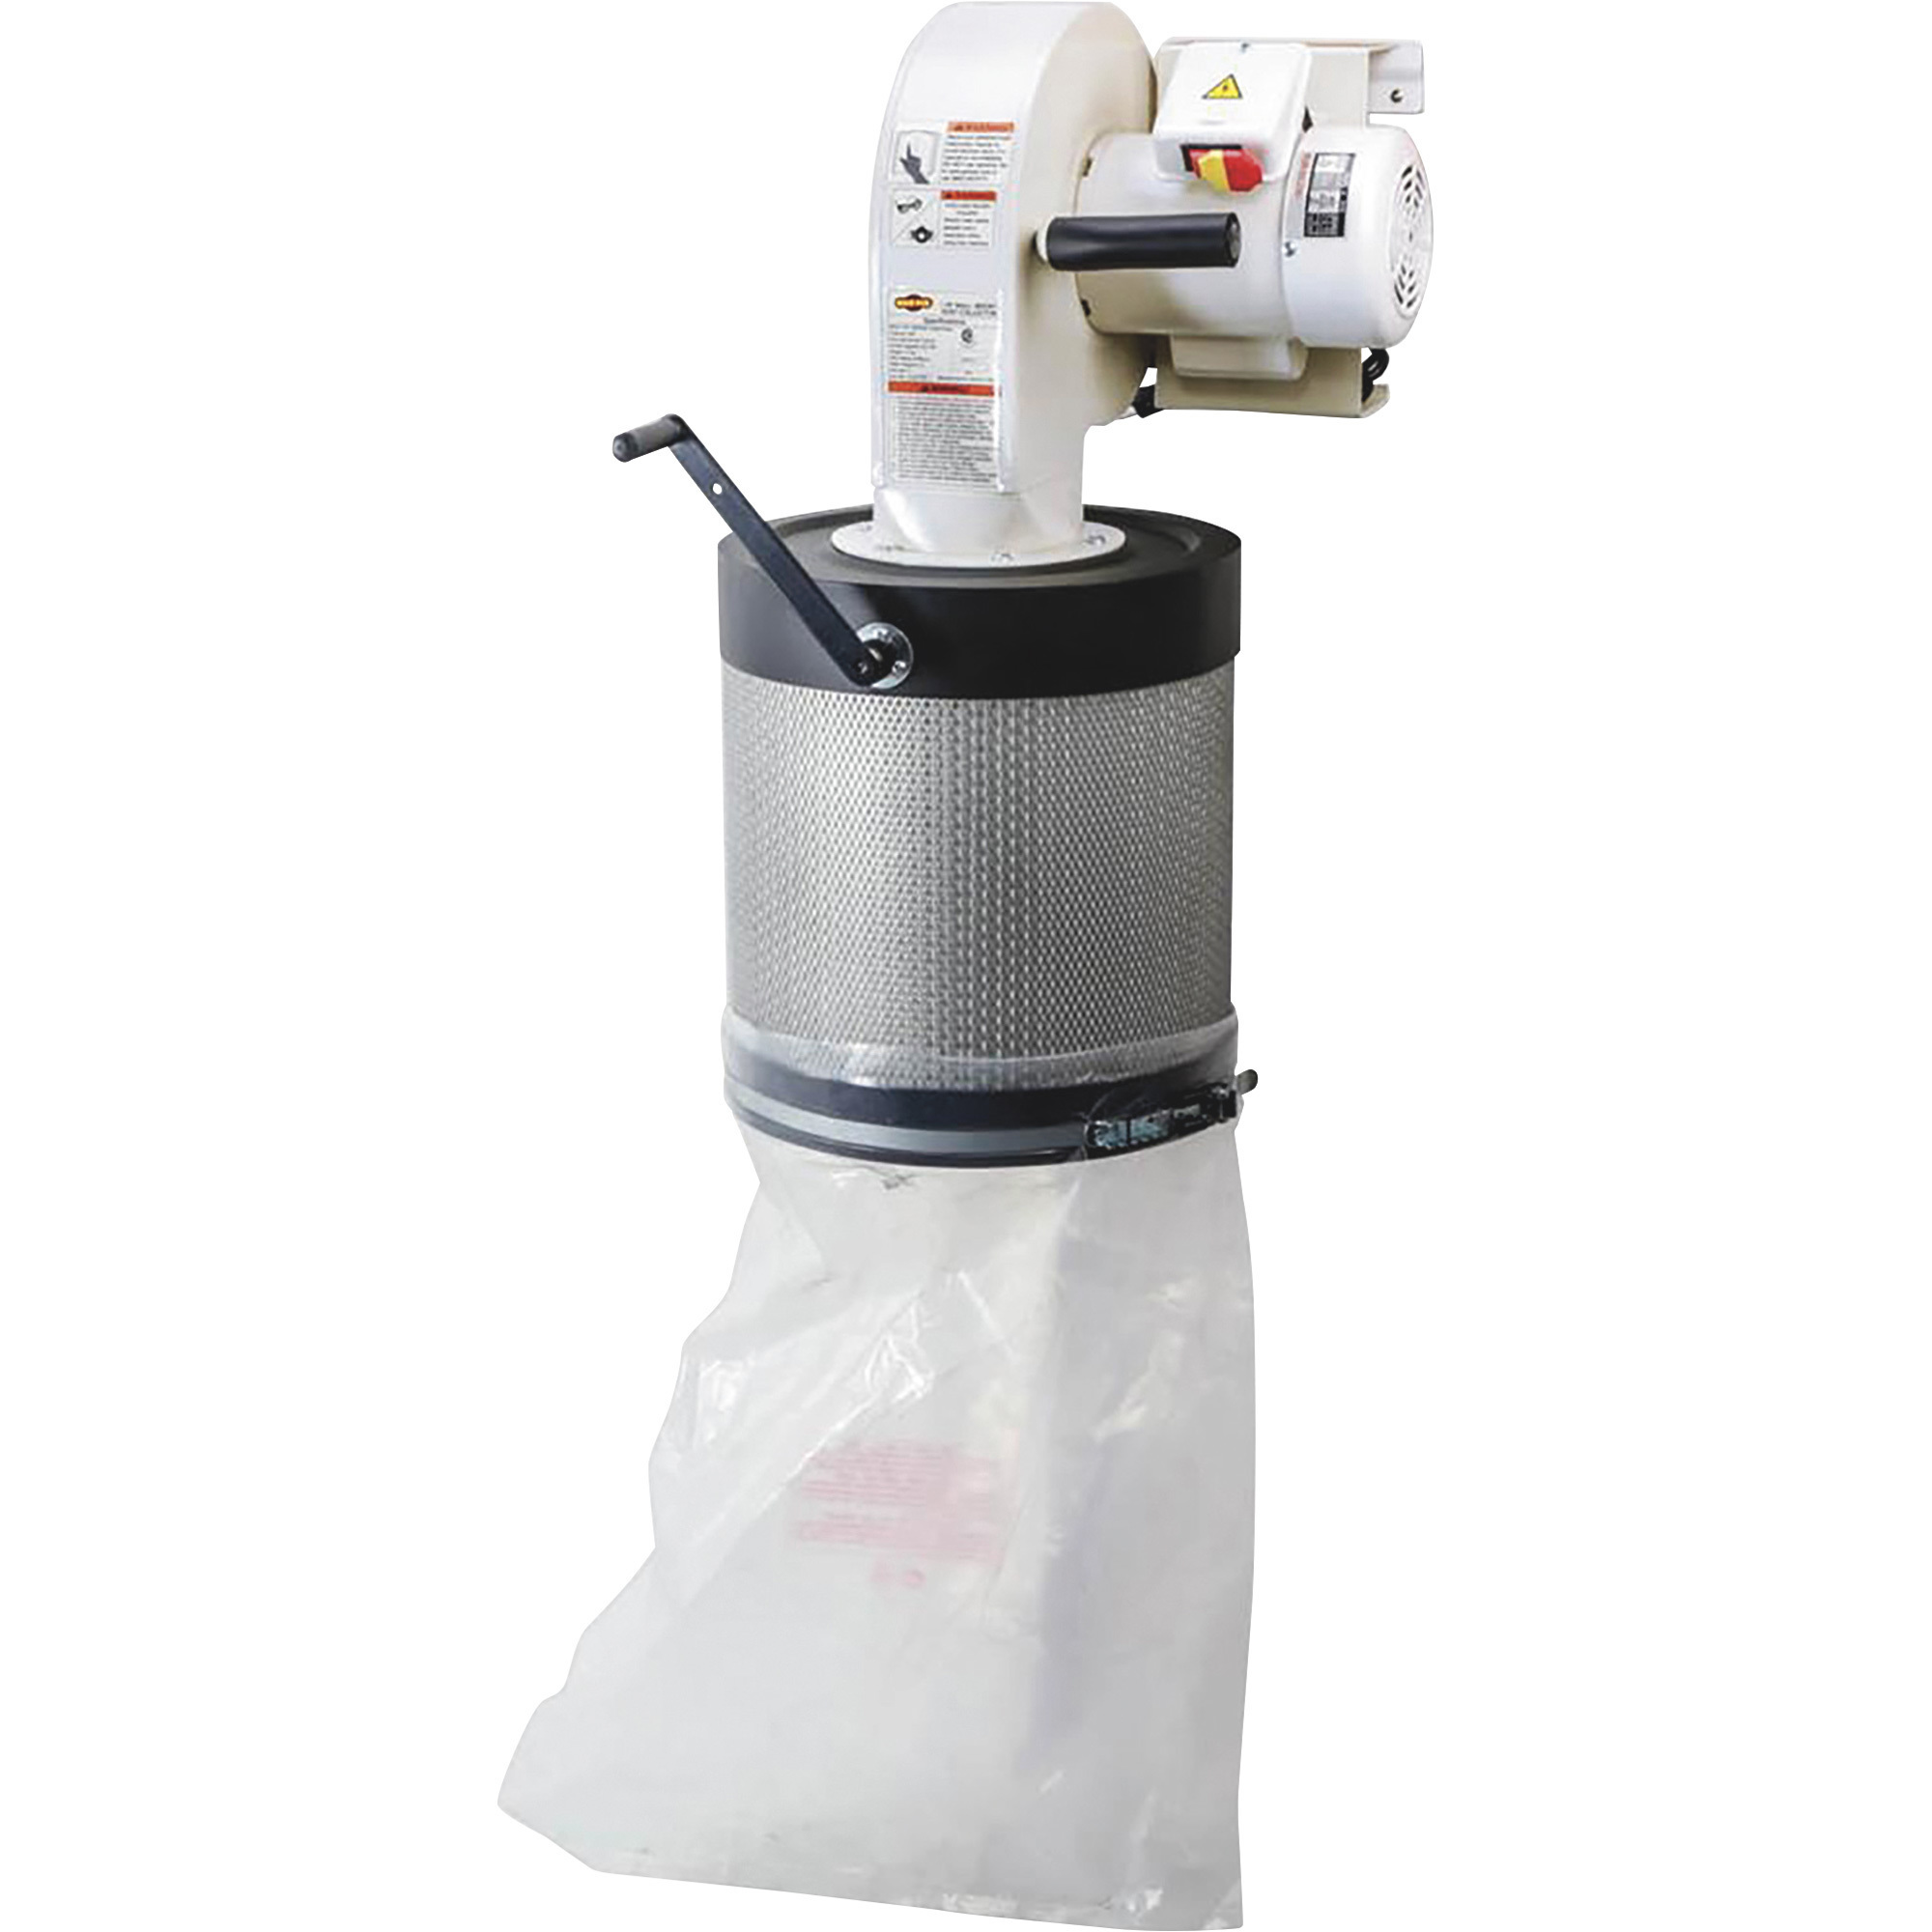 Shop Fox Wall-Mount Dust Collector with Canister Filter, Model W1844